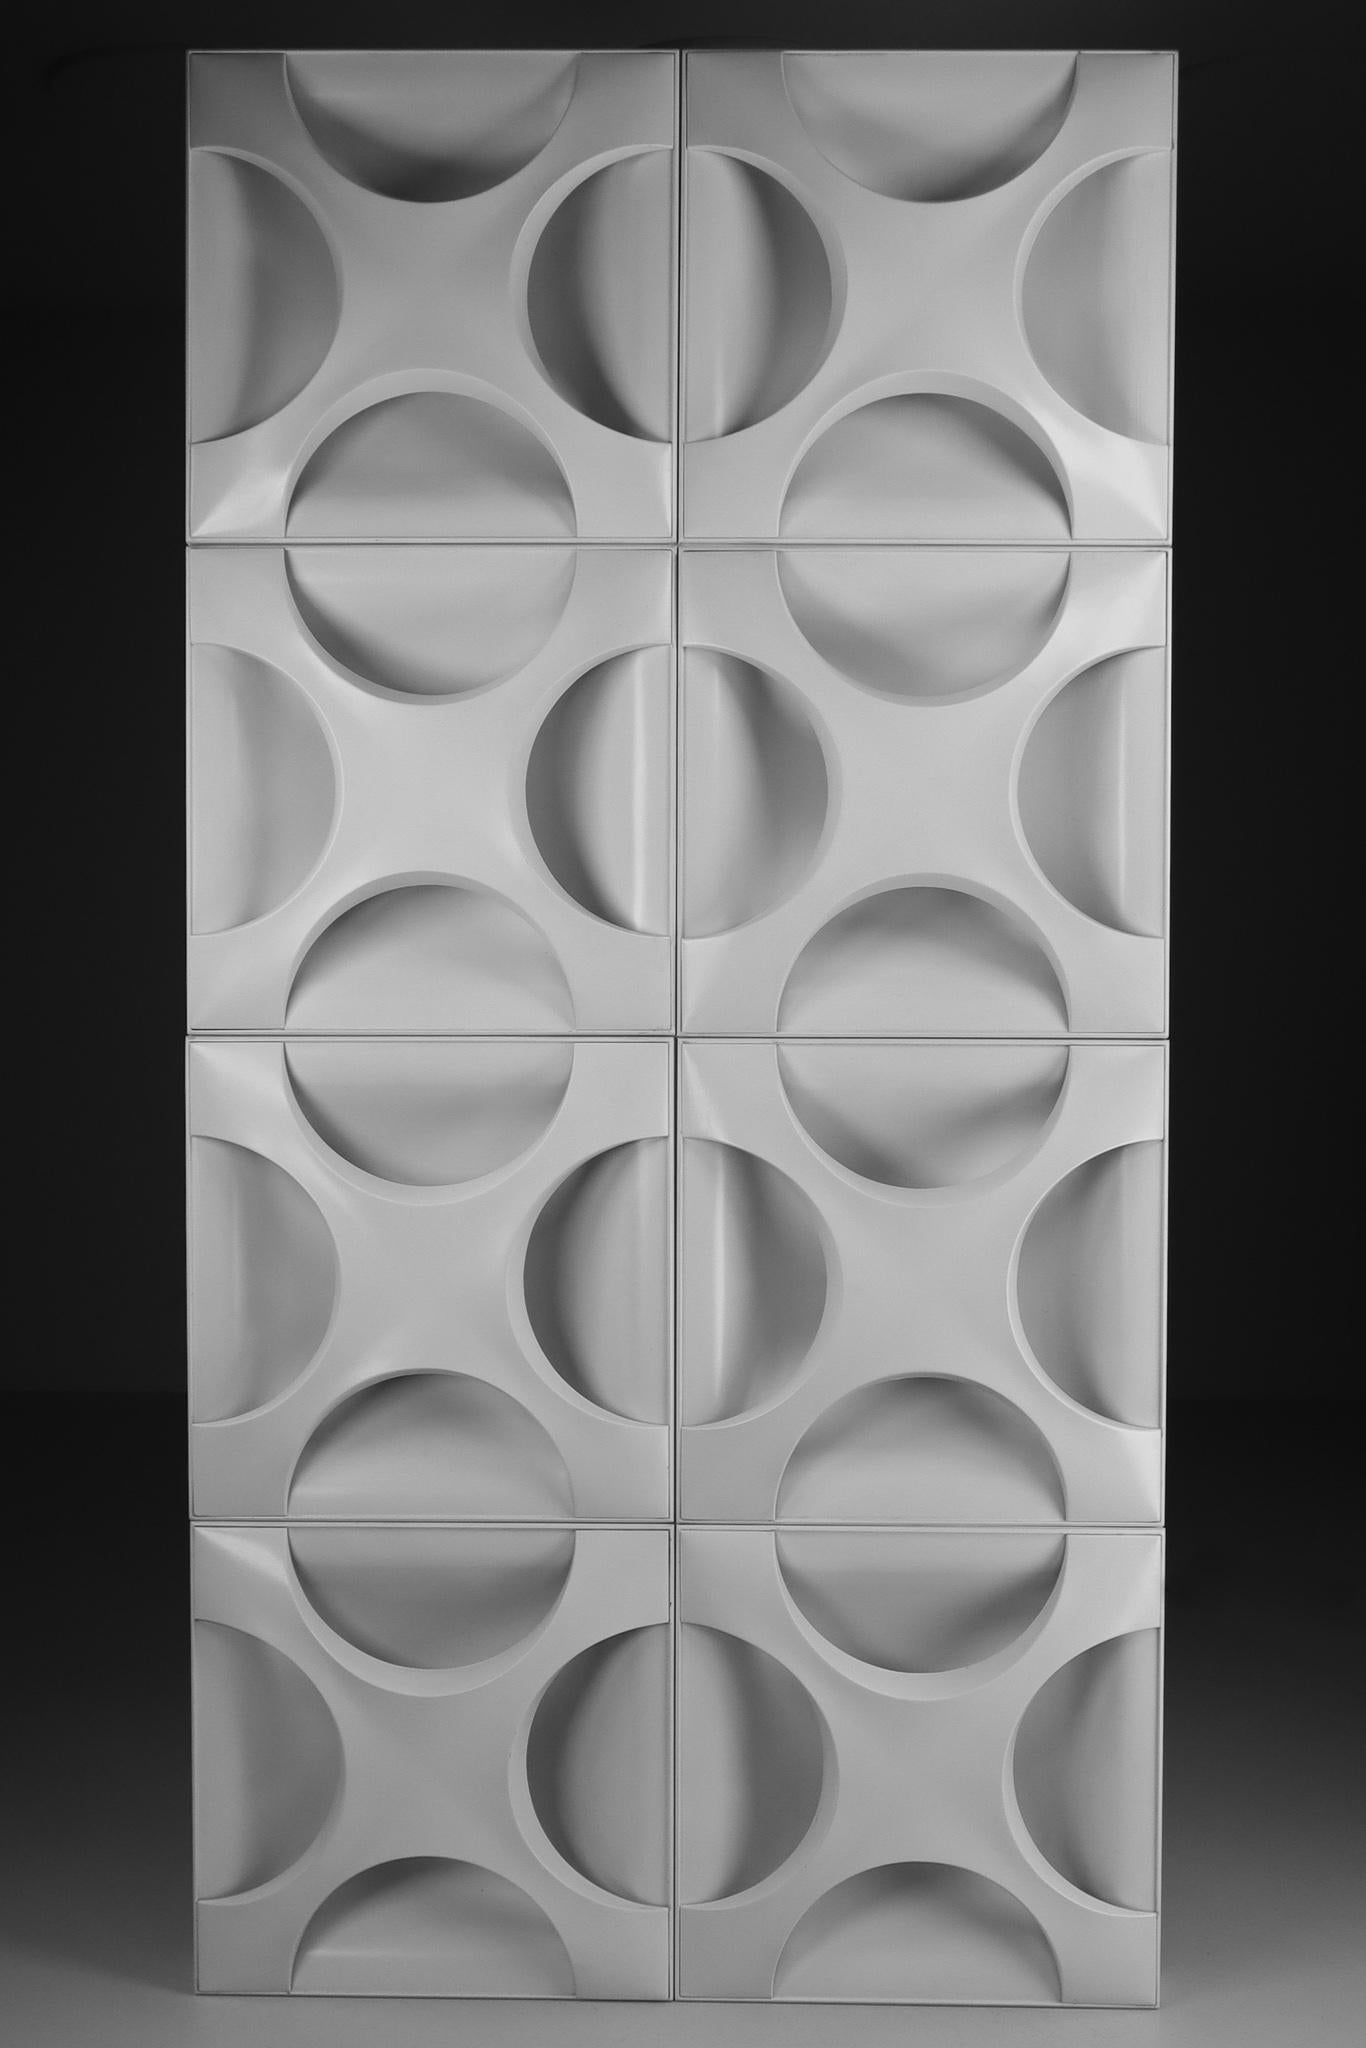 Large wall light sculpture designed by Dieter Witte and Rolf Krüger for Staff Leuchten, Germany, 1968.

Overwhelming oyster lacquer white wall light sculpture size 1.25 meter x 2.5 meter. 8 oyster elements built in a wooden frame to be arranged in